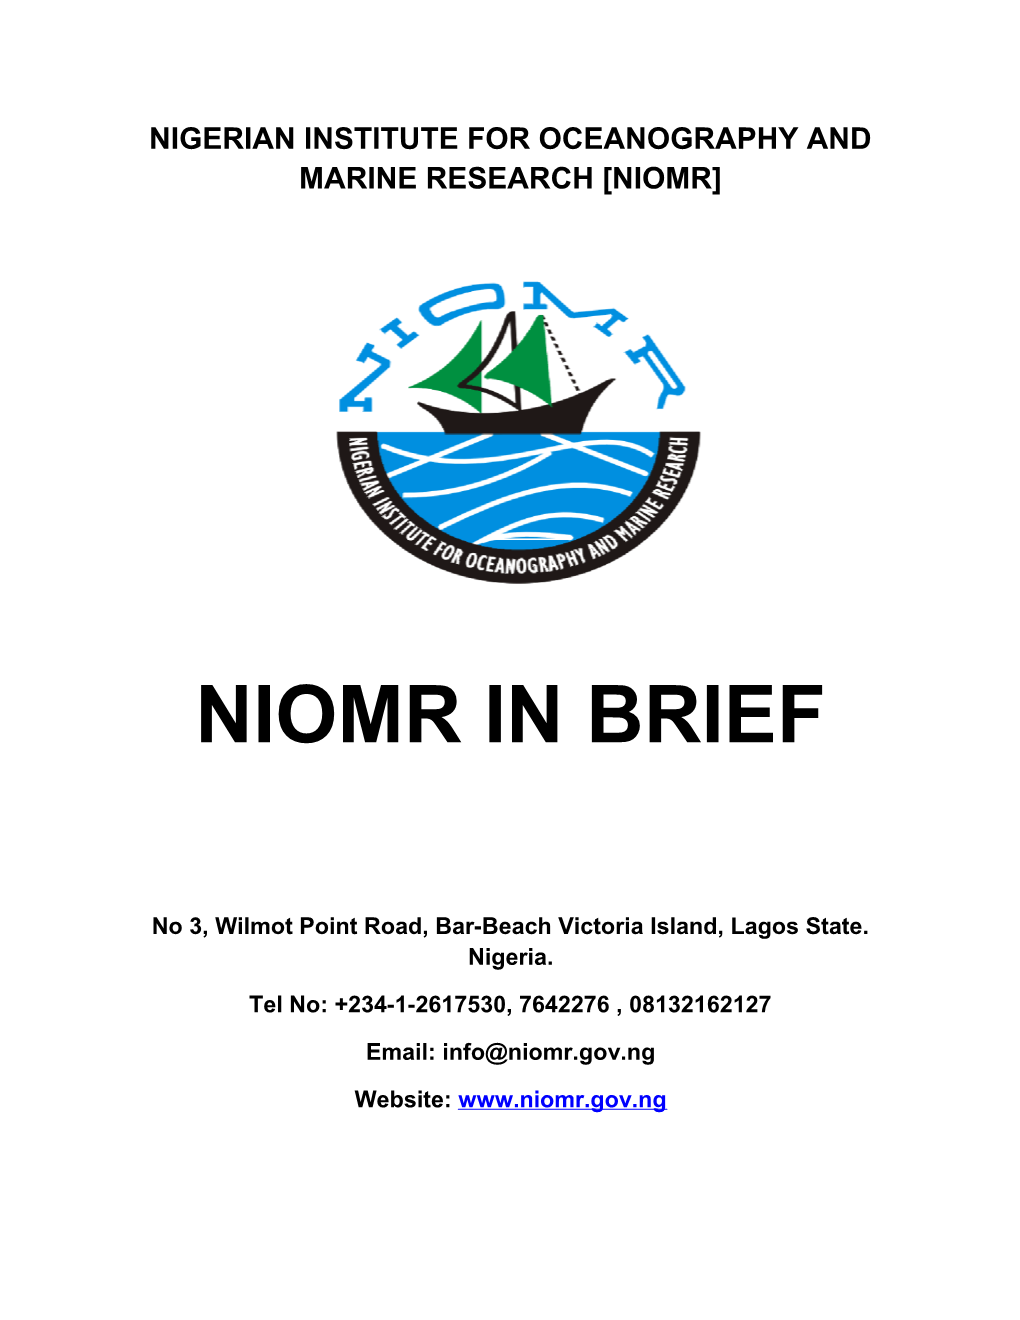 Nigerian Institute for Oceanography and Marine Research Niomr